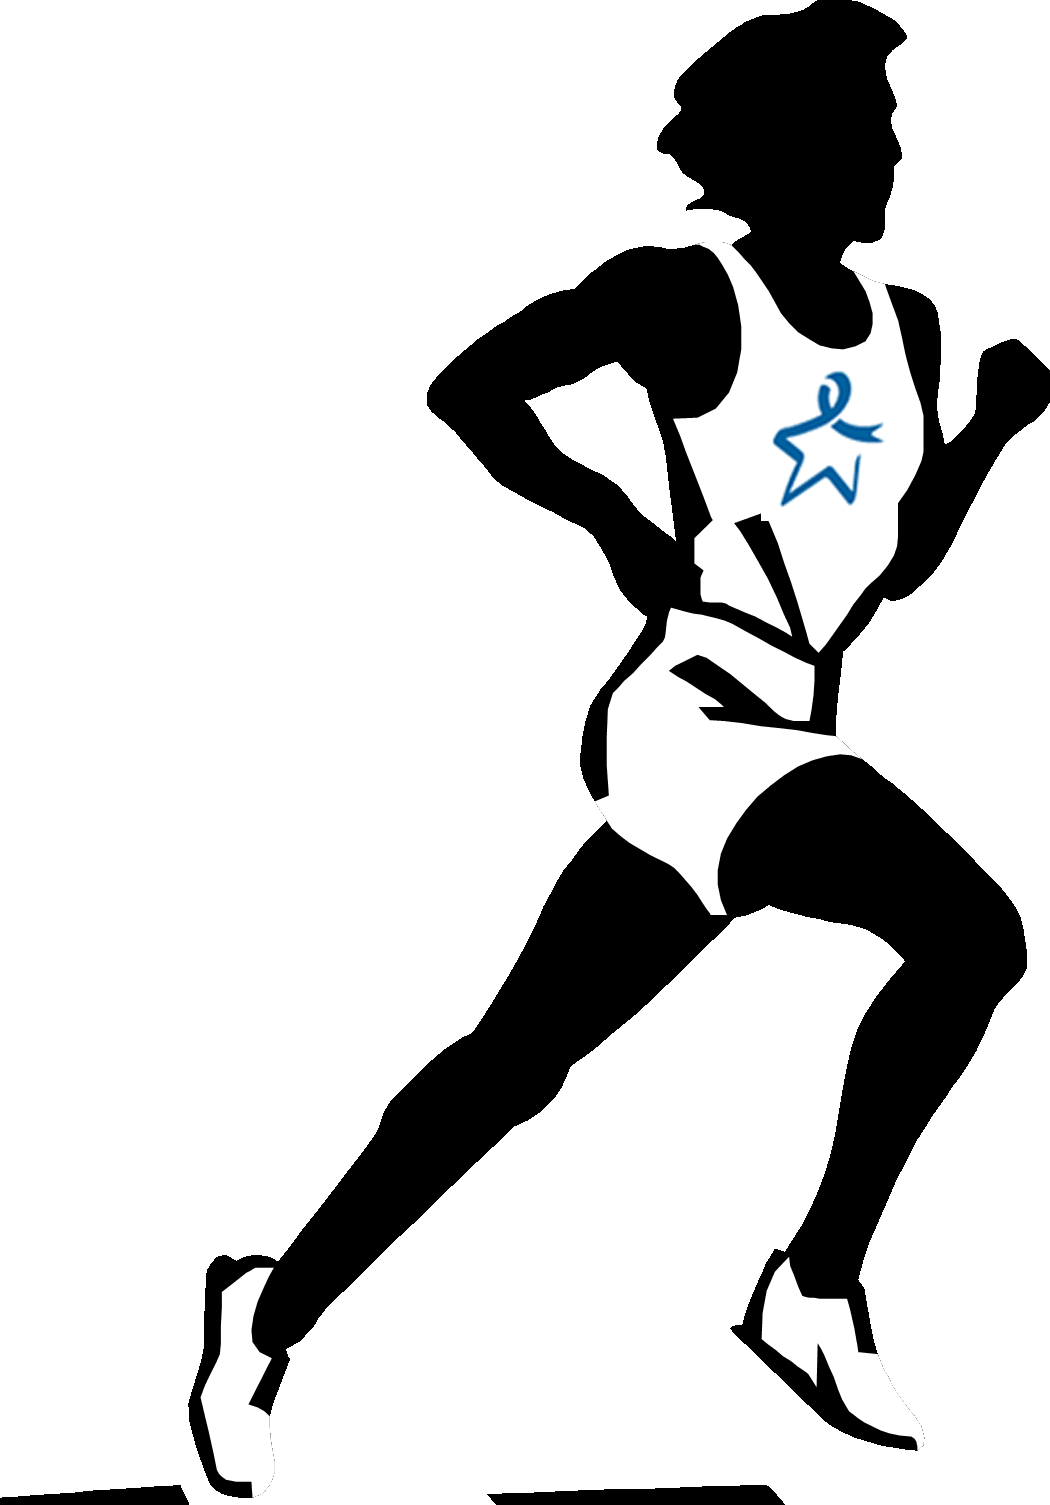 Race clipart athlete. Cross country runner clip